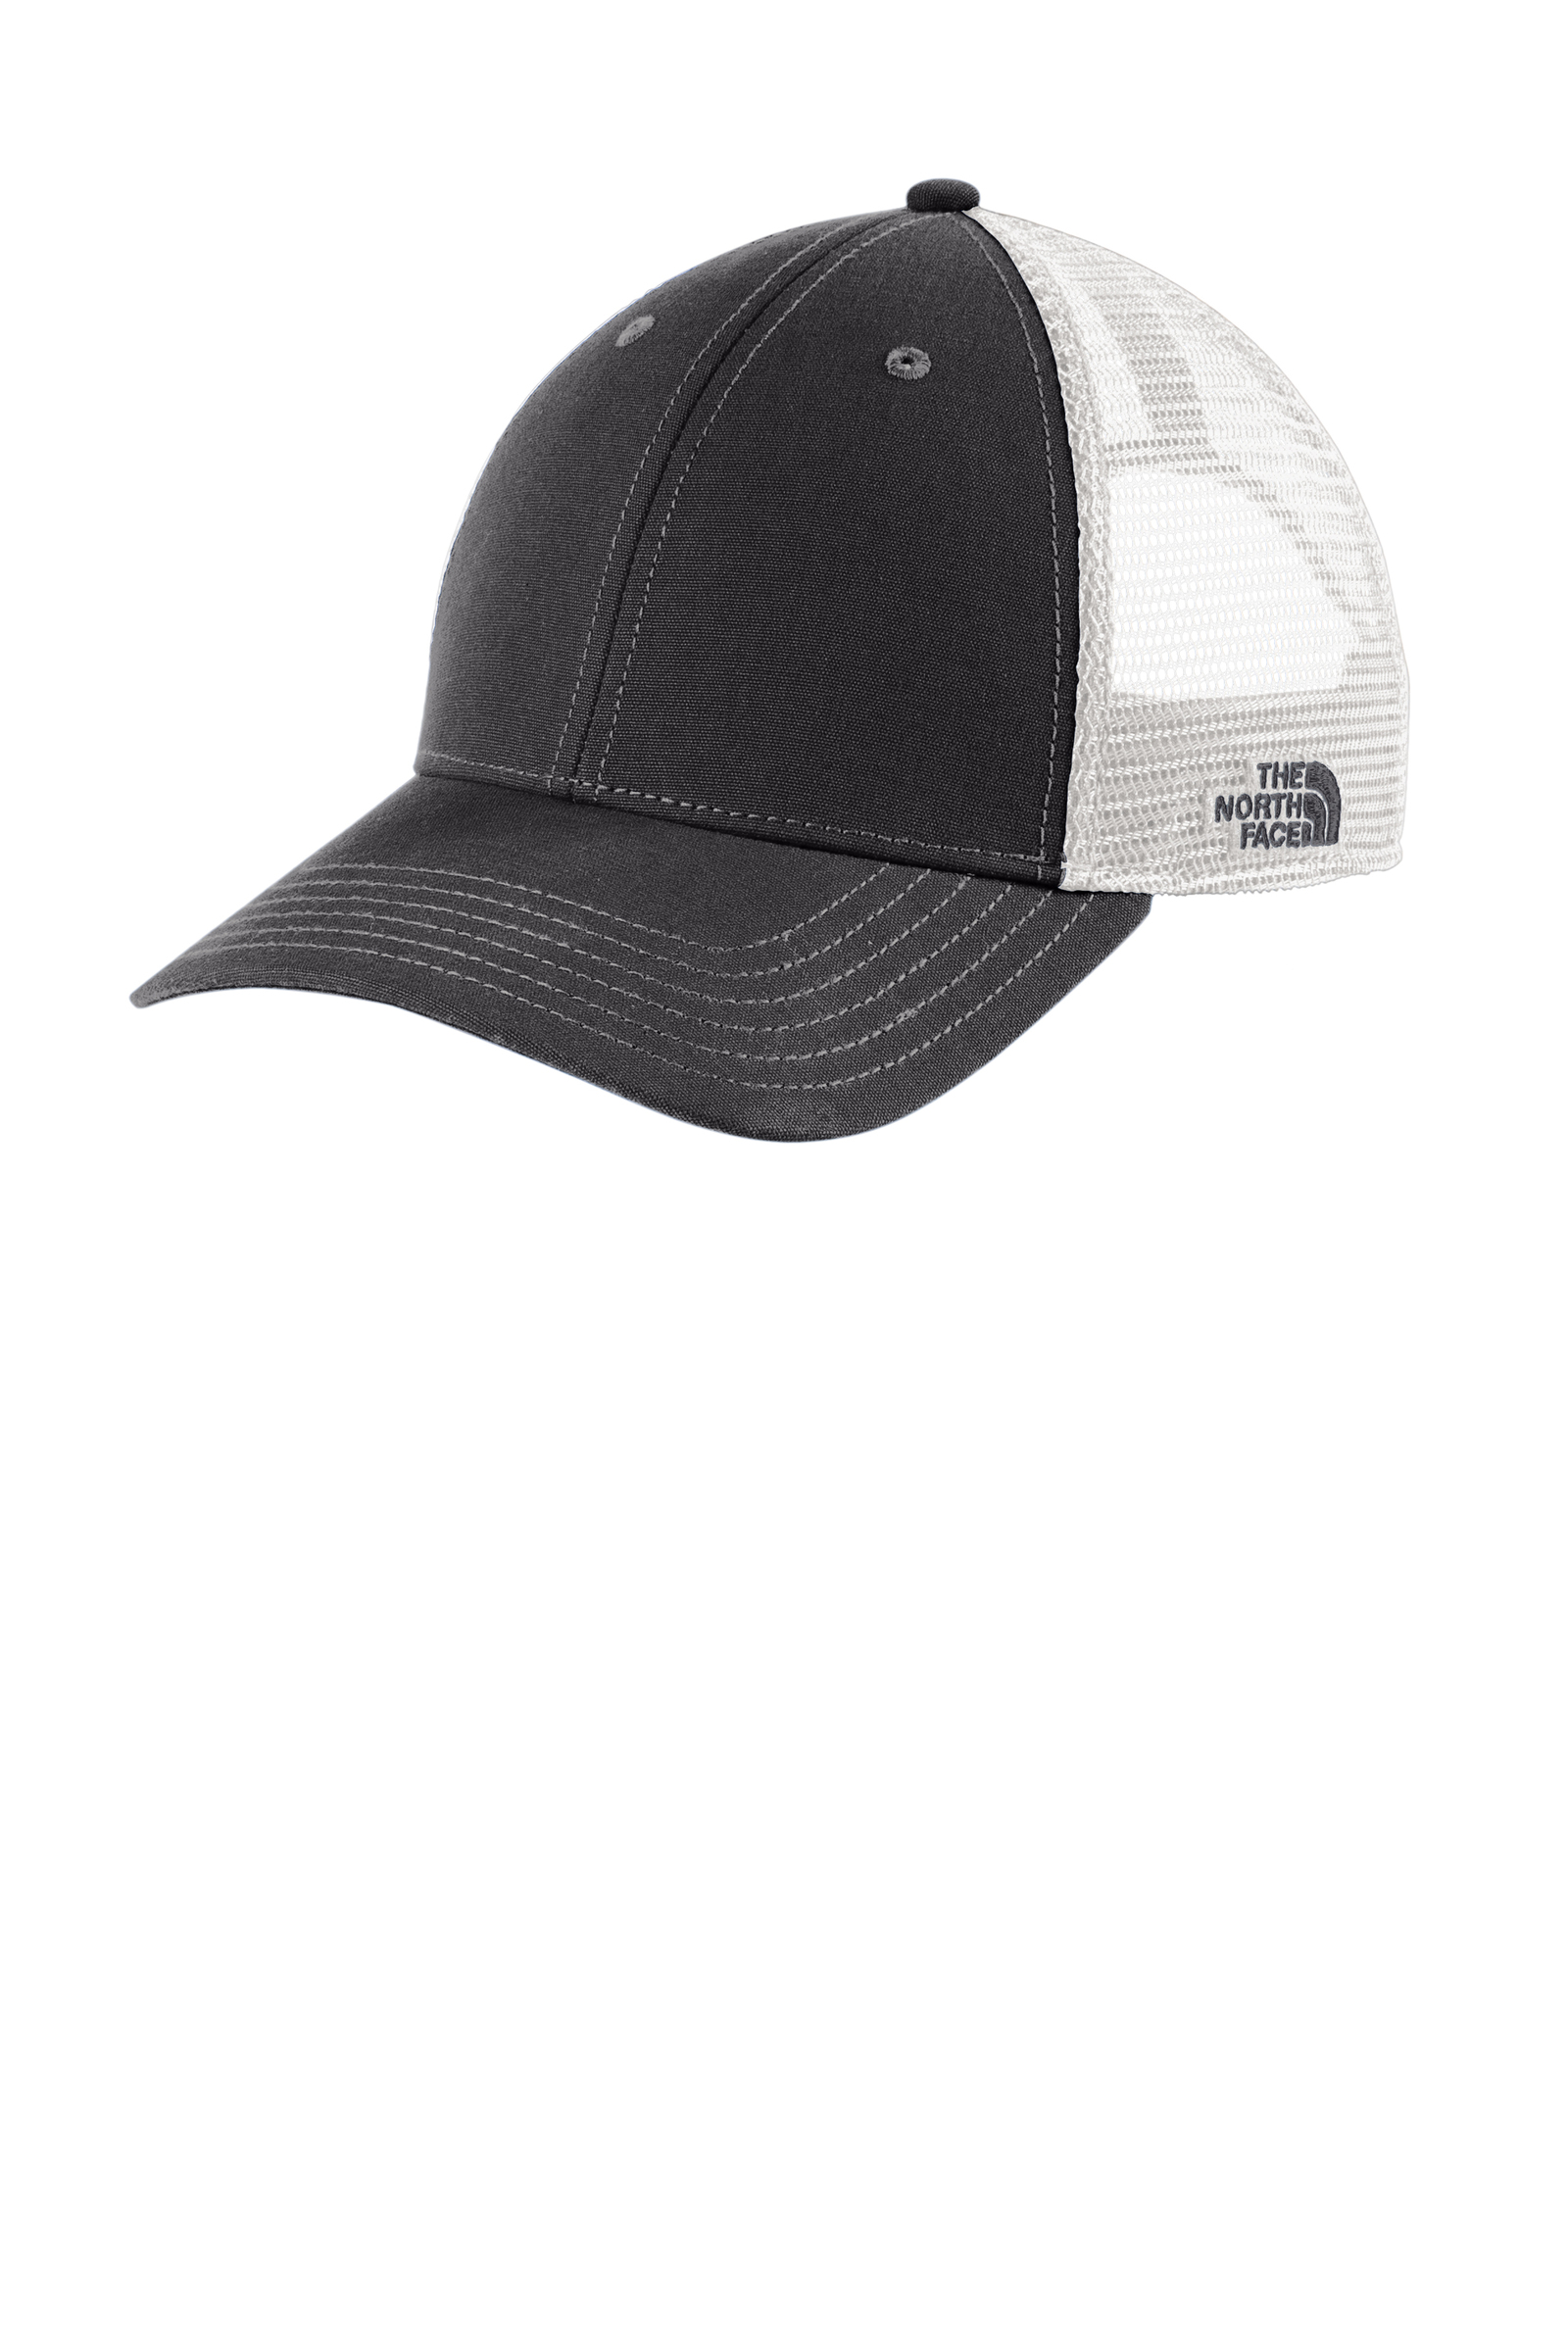 The North Face Embroidered Ultimate Trucker Cap